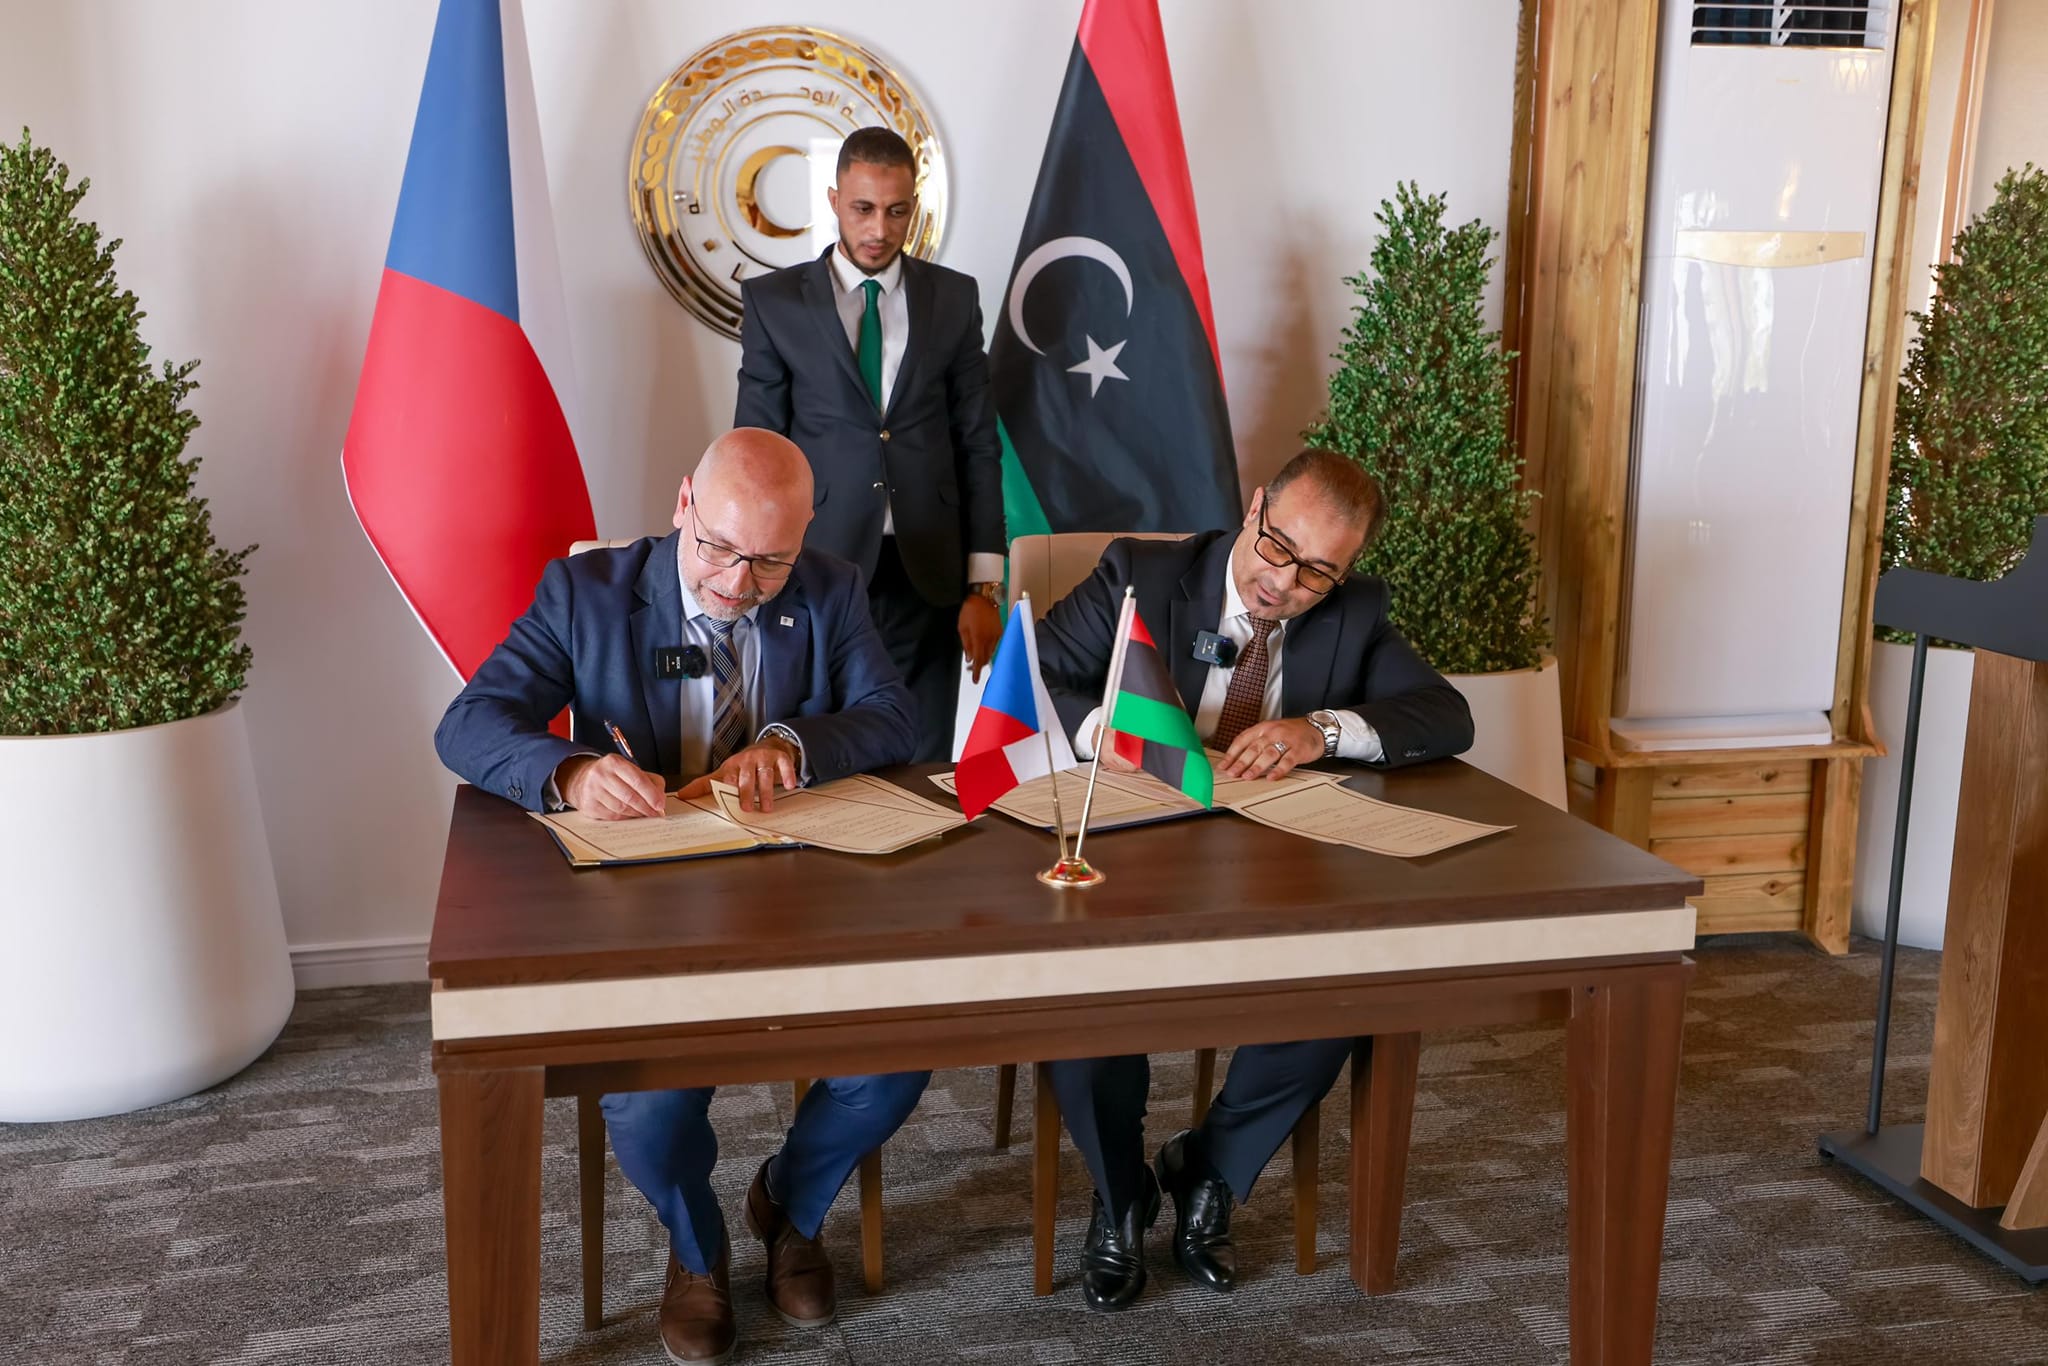 Signing of a memorandum of understanding for political consultation between the foreign ministries of Libya and the Czech Republic.